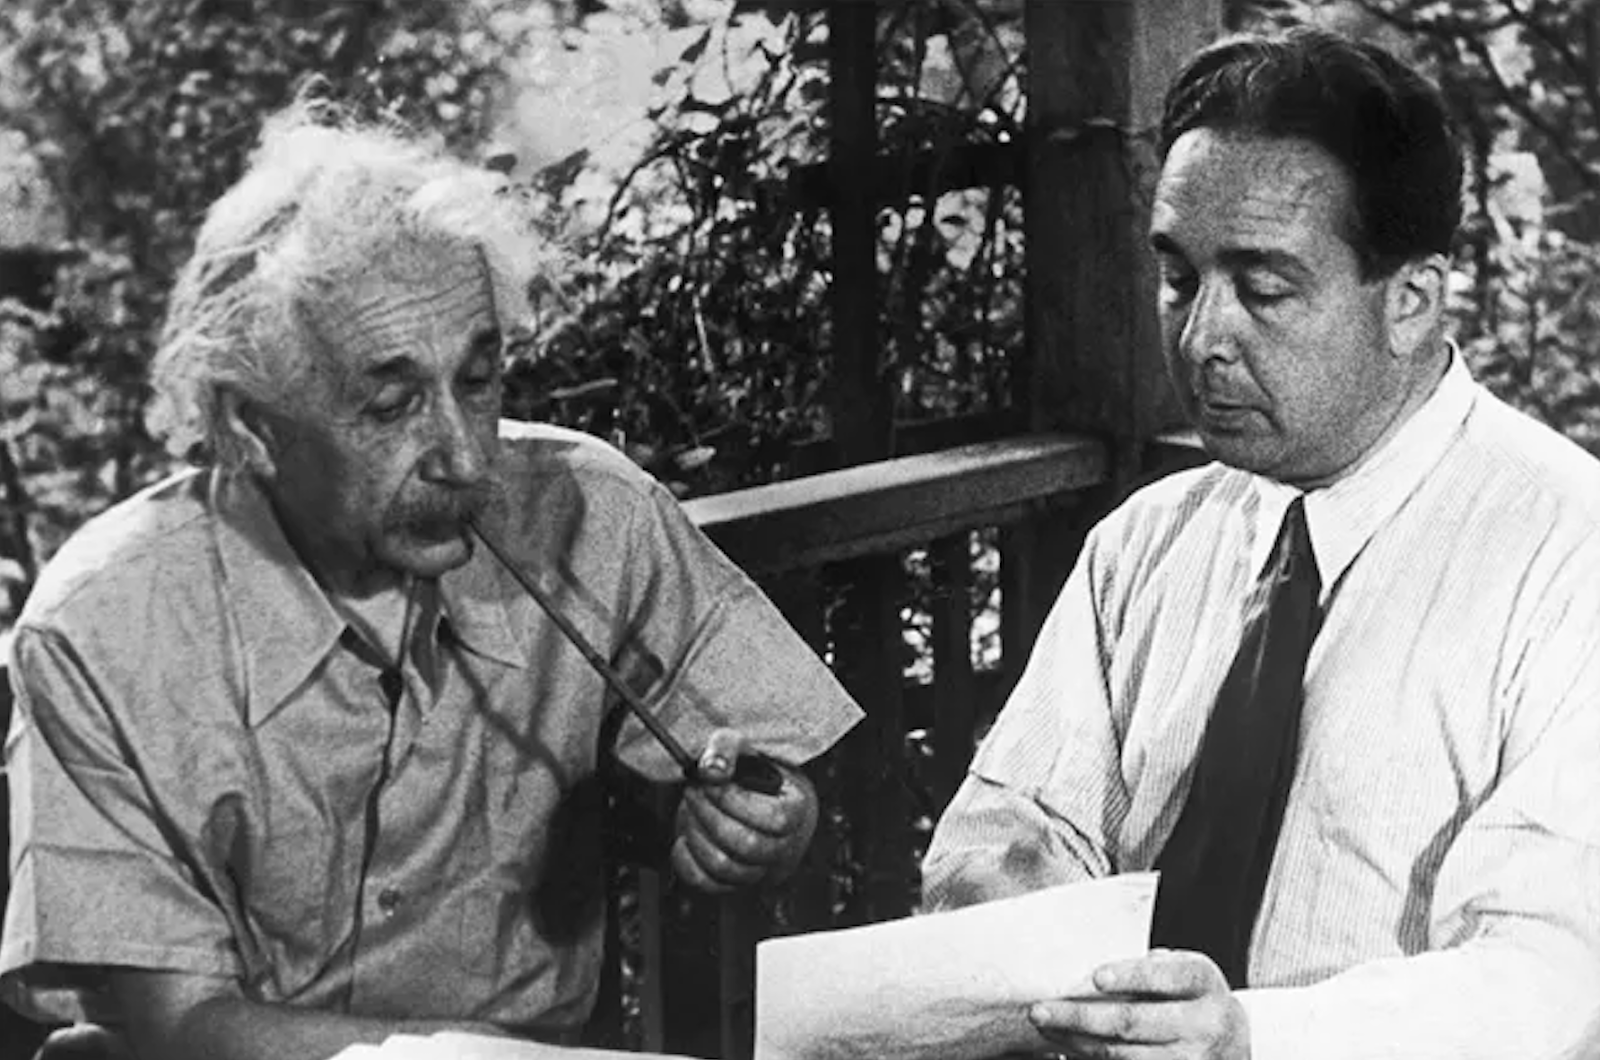 Physicists Albert Einstein (left) and Leo Szilard (right) review their letter to FDR about the potential for Nazi Germany to build atomic bombs. Photograph is from the National Park Service.